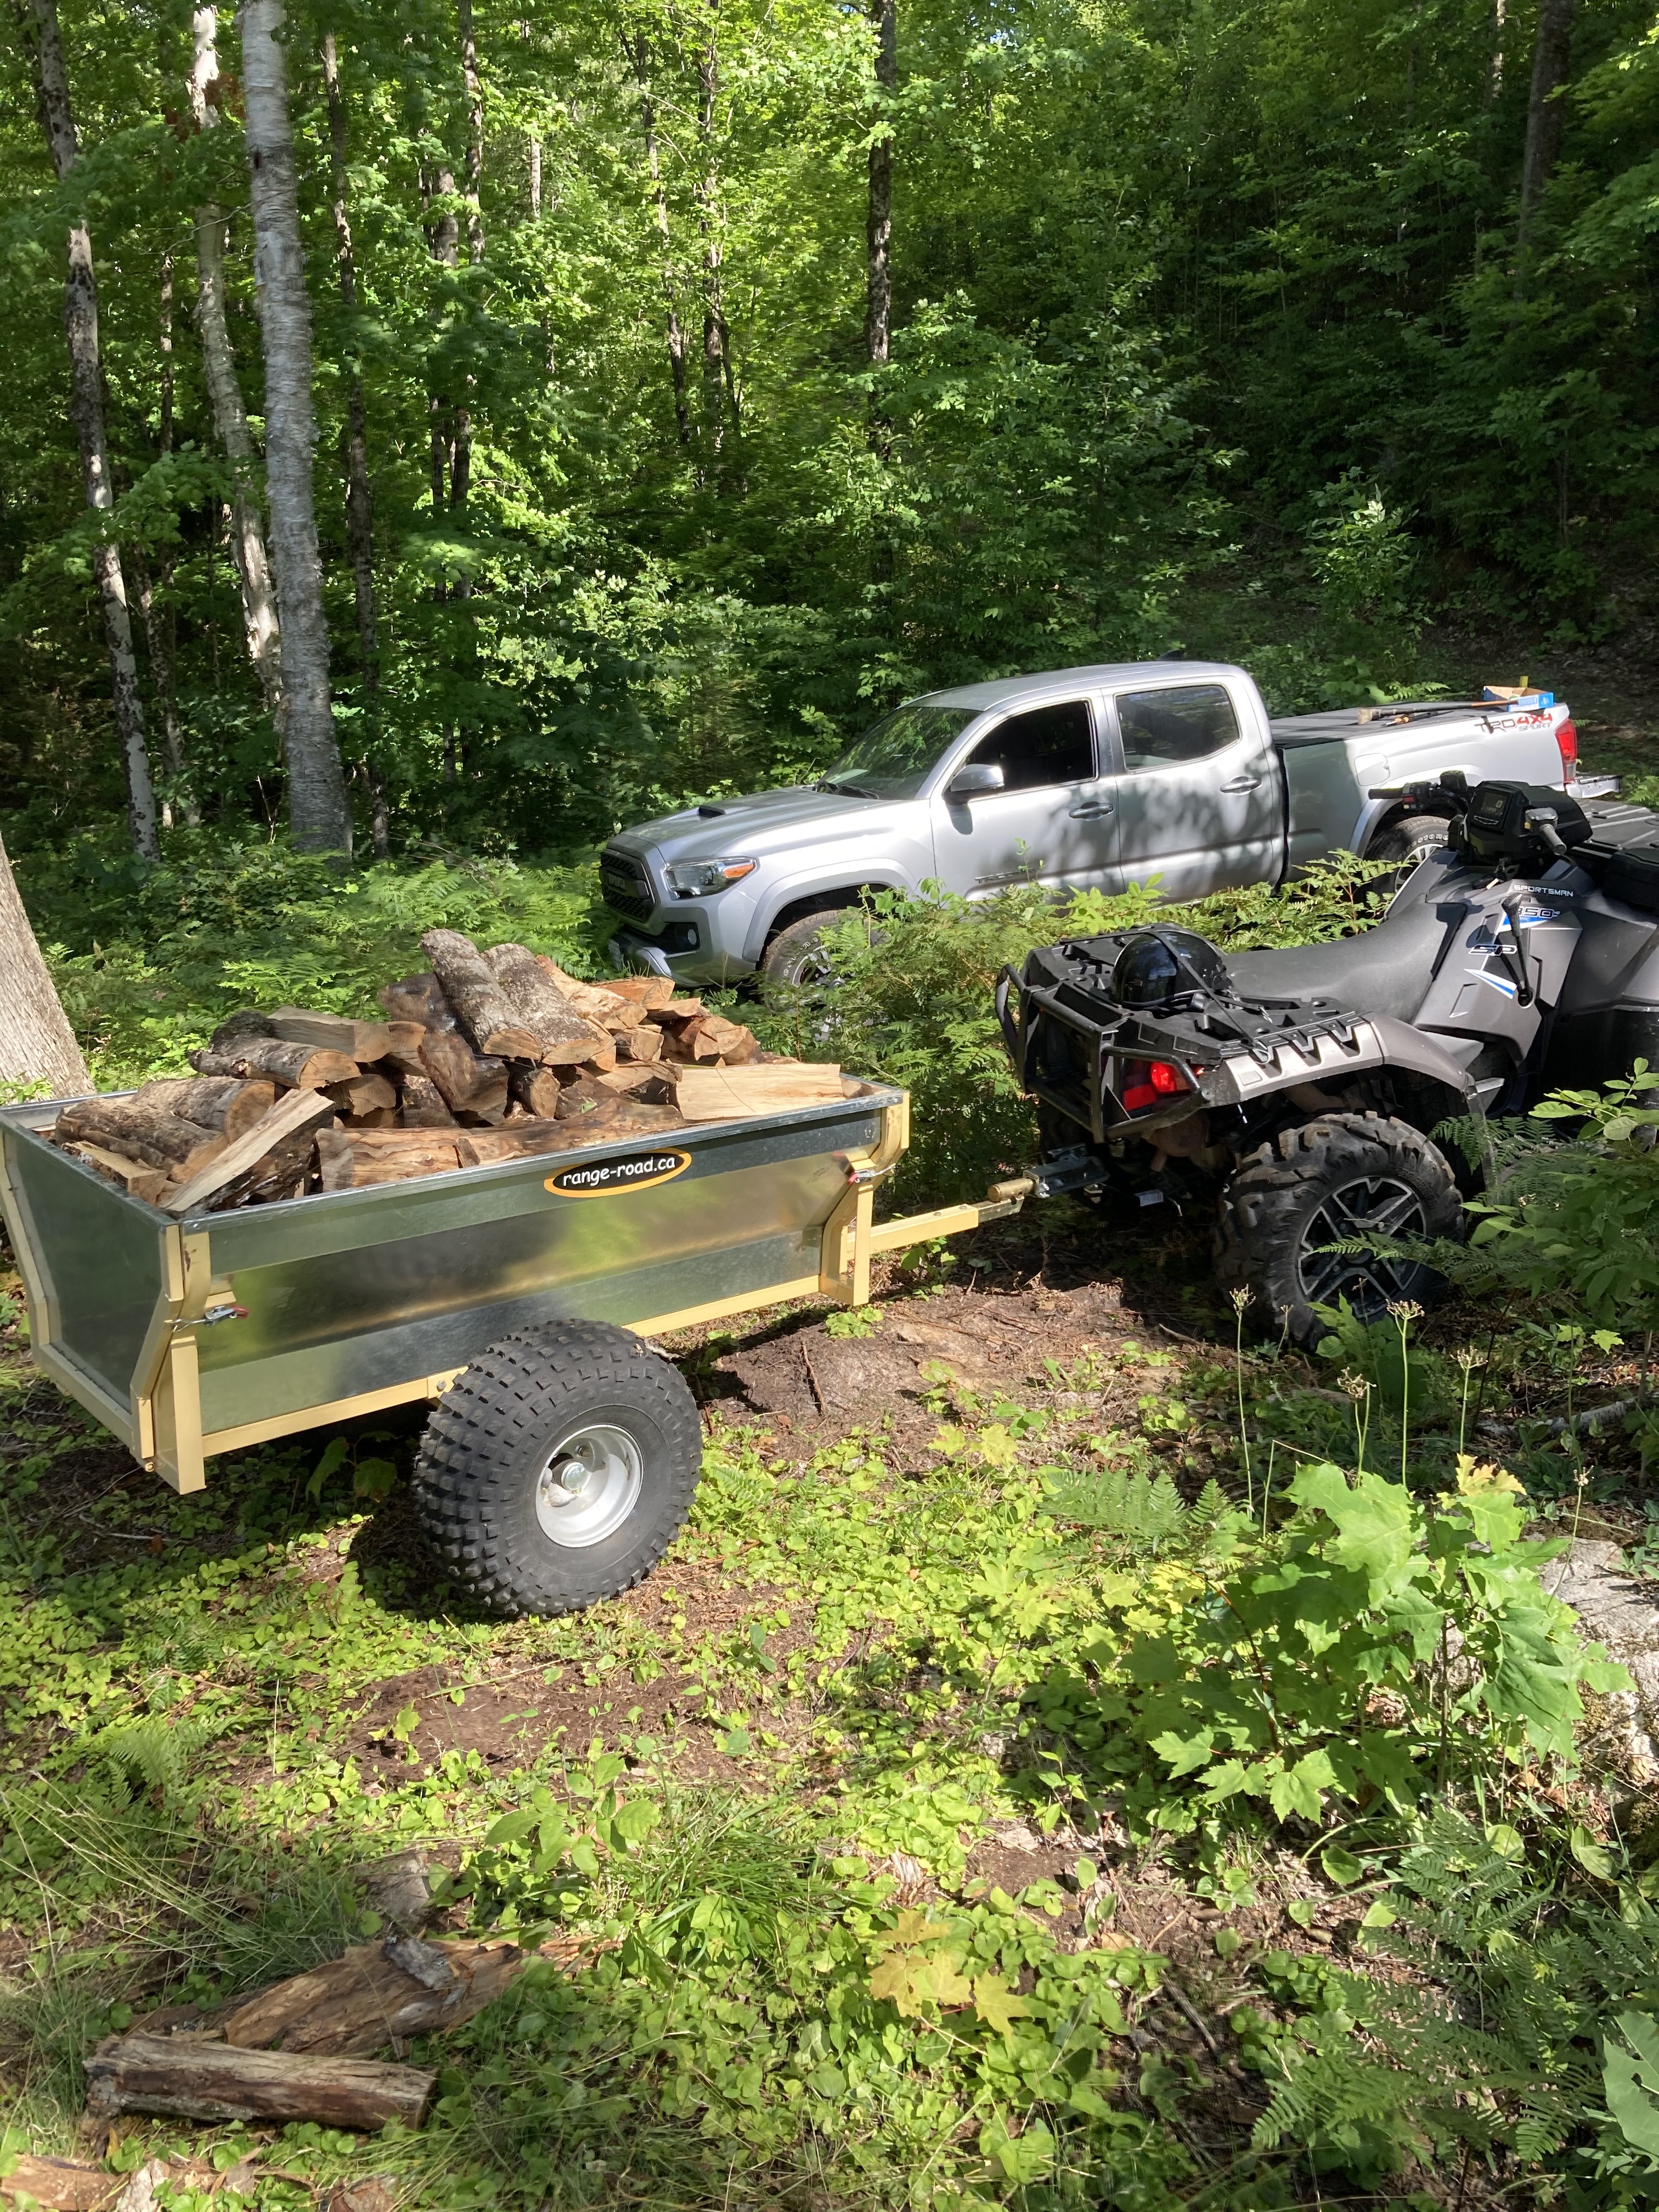 The ATV with a trailer, about 30 by 54 inches with silver galvanized steel panels, faded yellow tube steel or the structure, and two large turf tires. It’s loaded with split firewood.